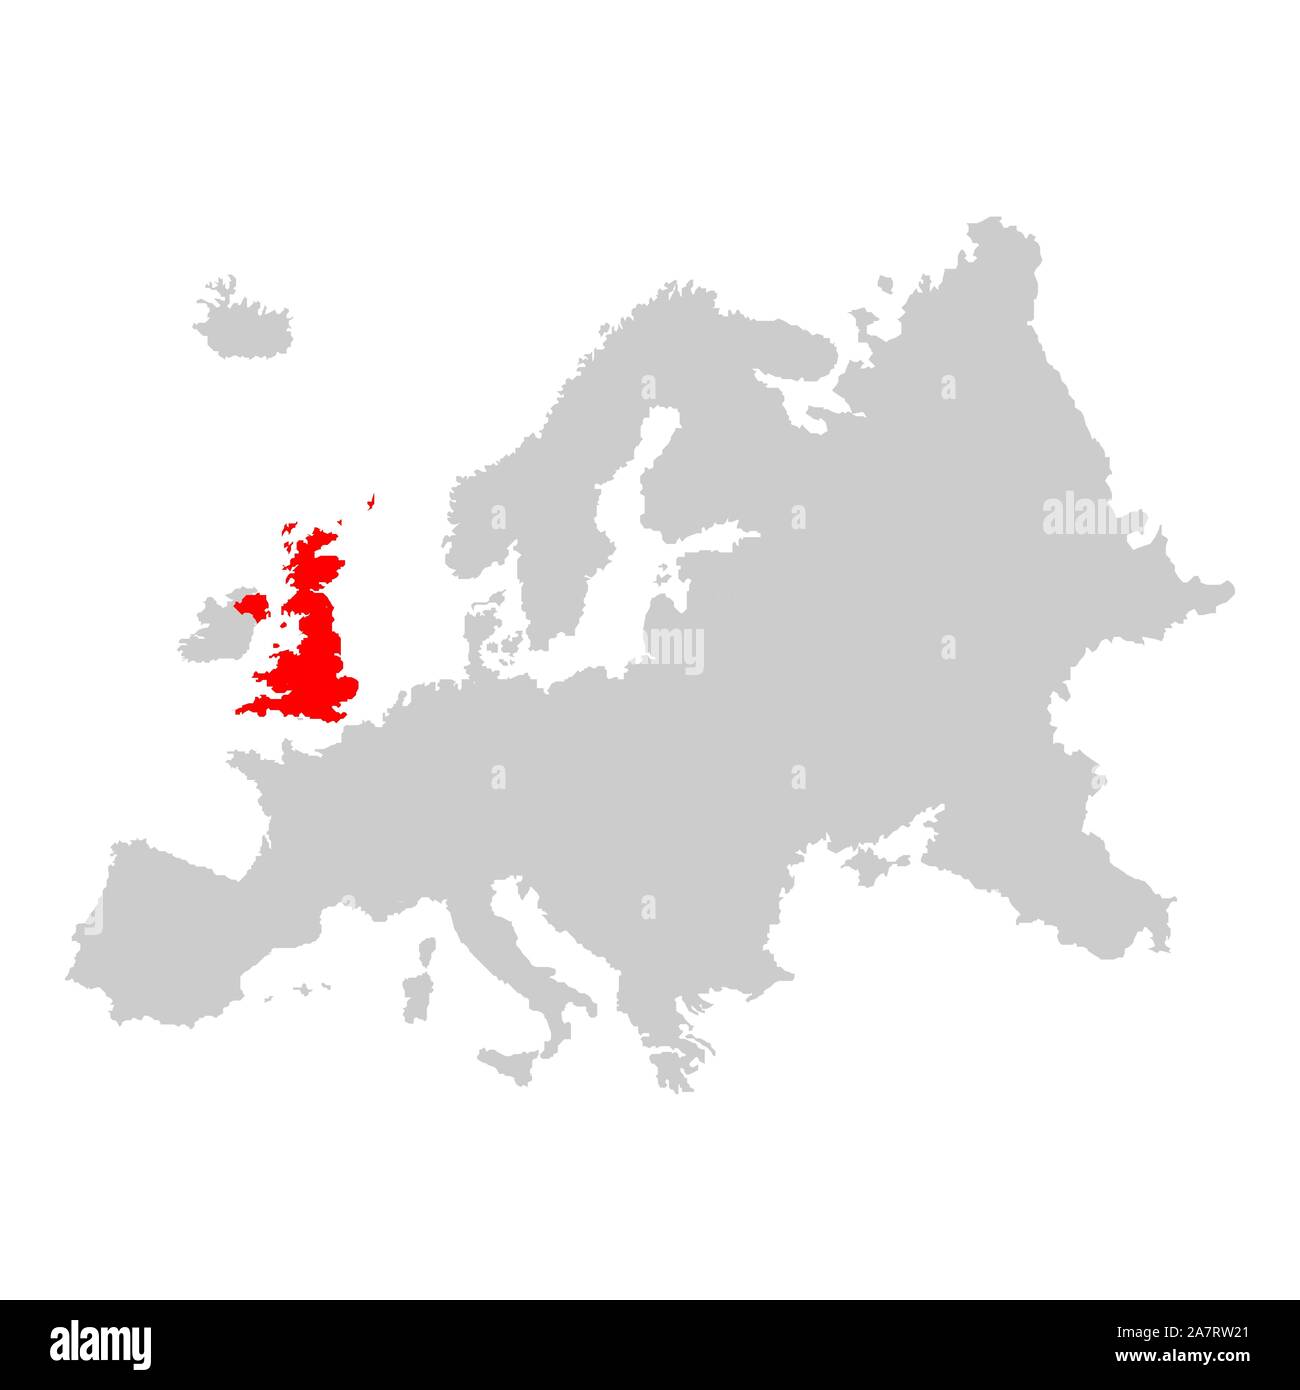 UK on map of europe Stock Vector